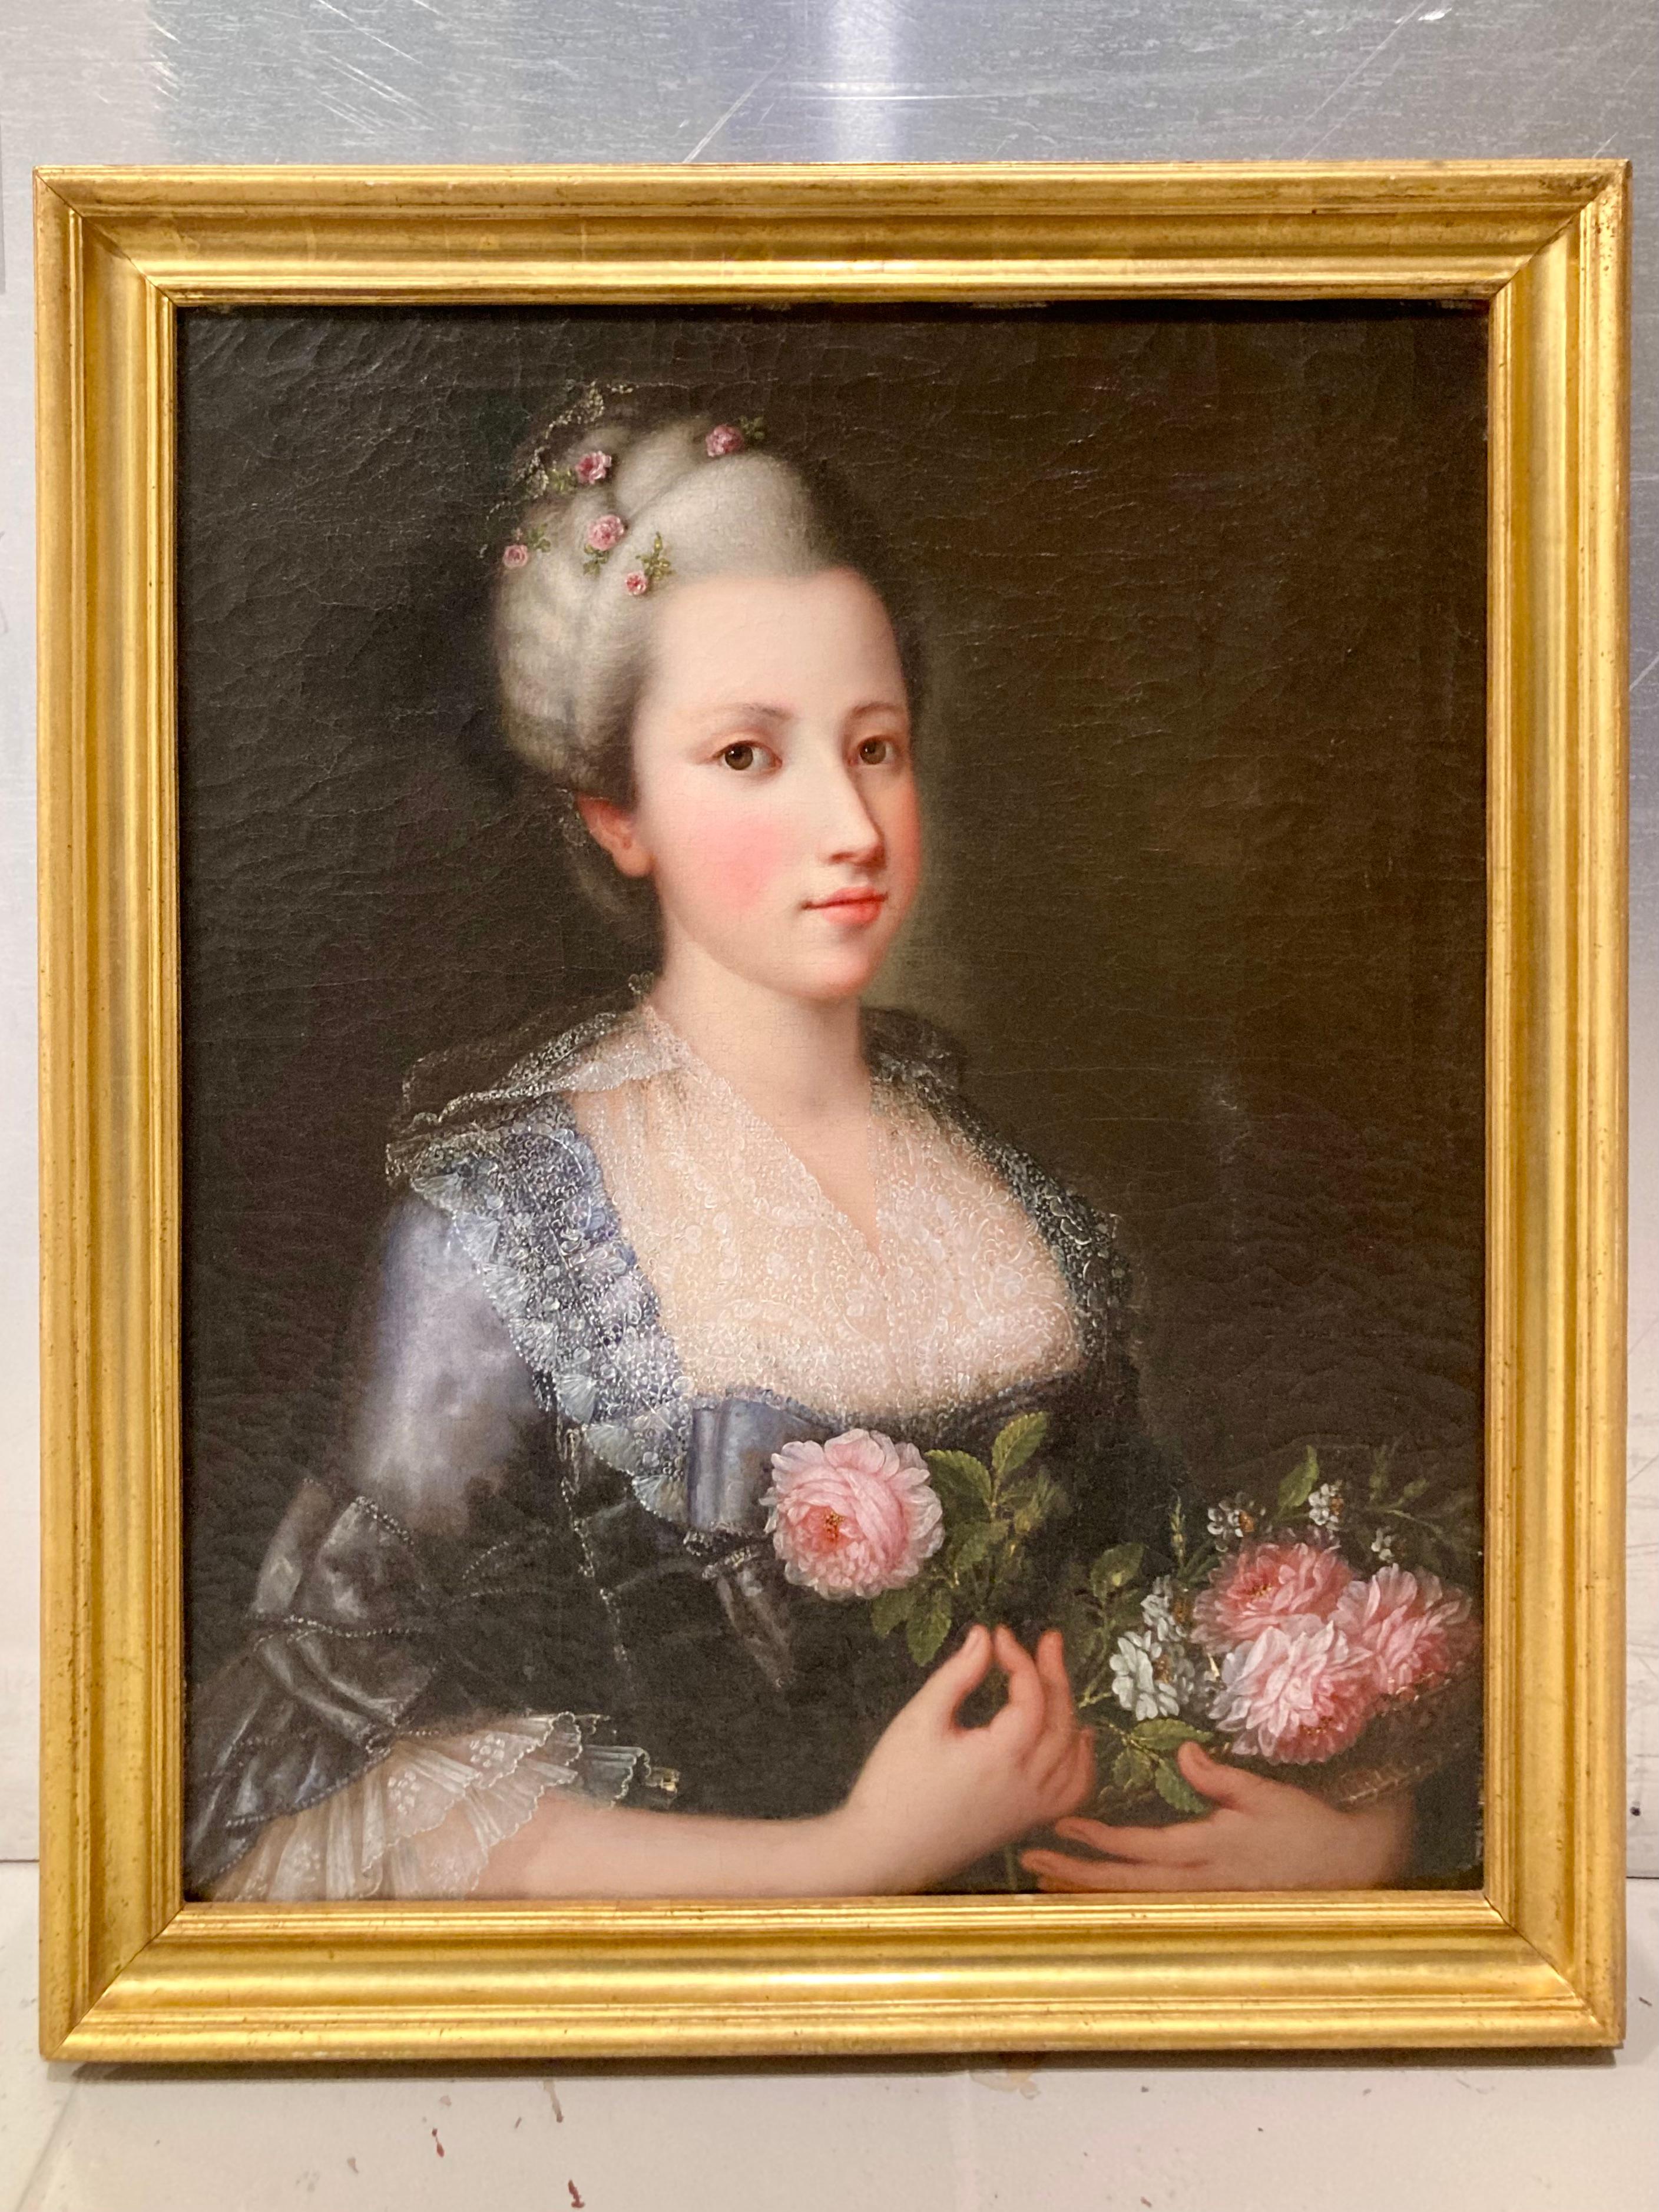 Beautiful Italian 18th Century portrait of a woman. Amazing details especially with the fabrics. Nicely framed and ready to hang in your home.